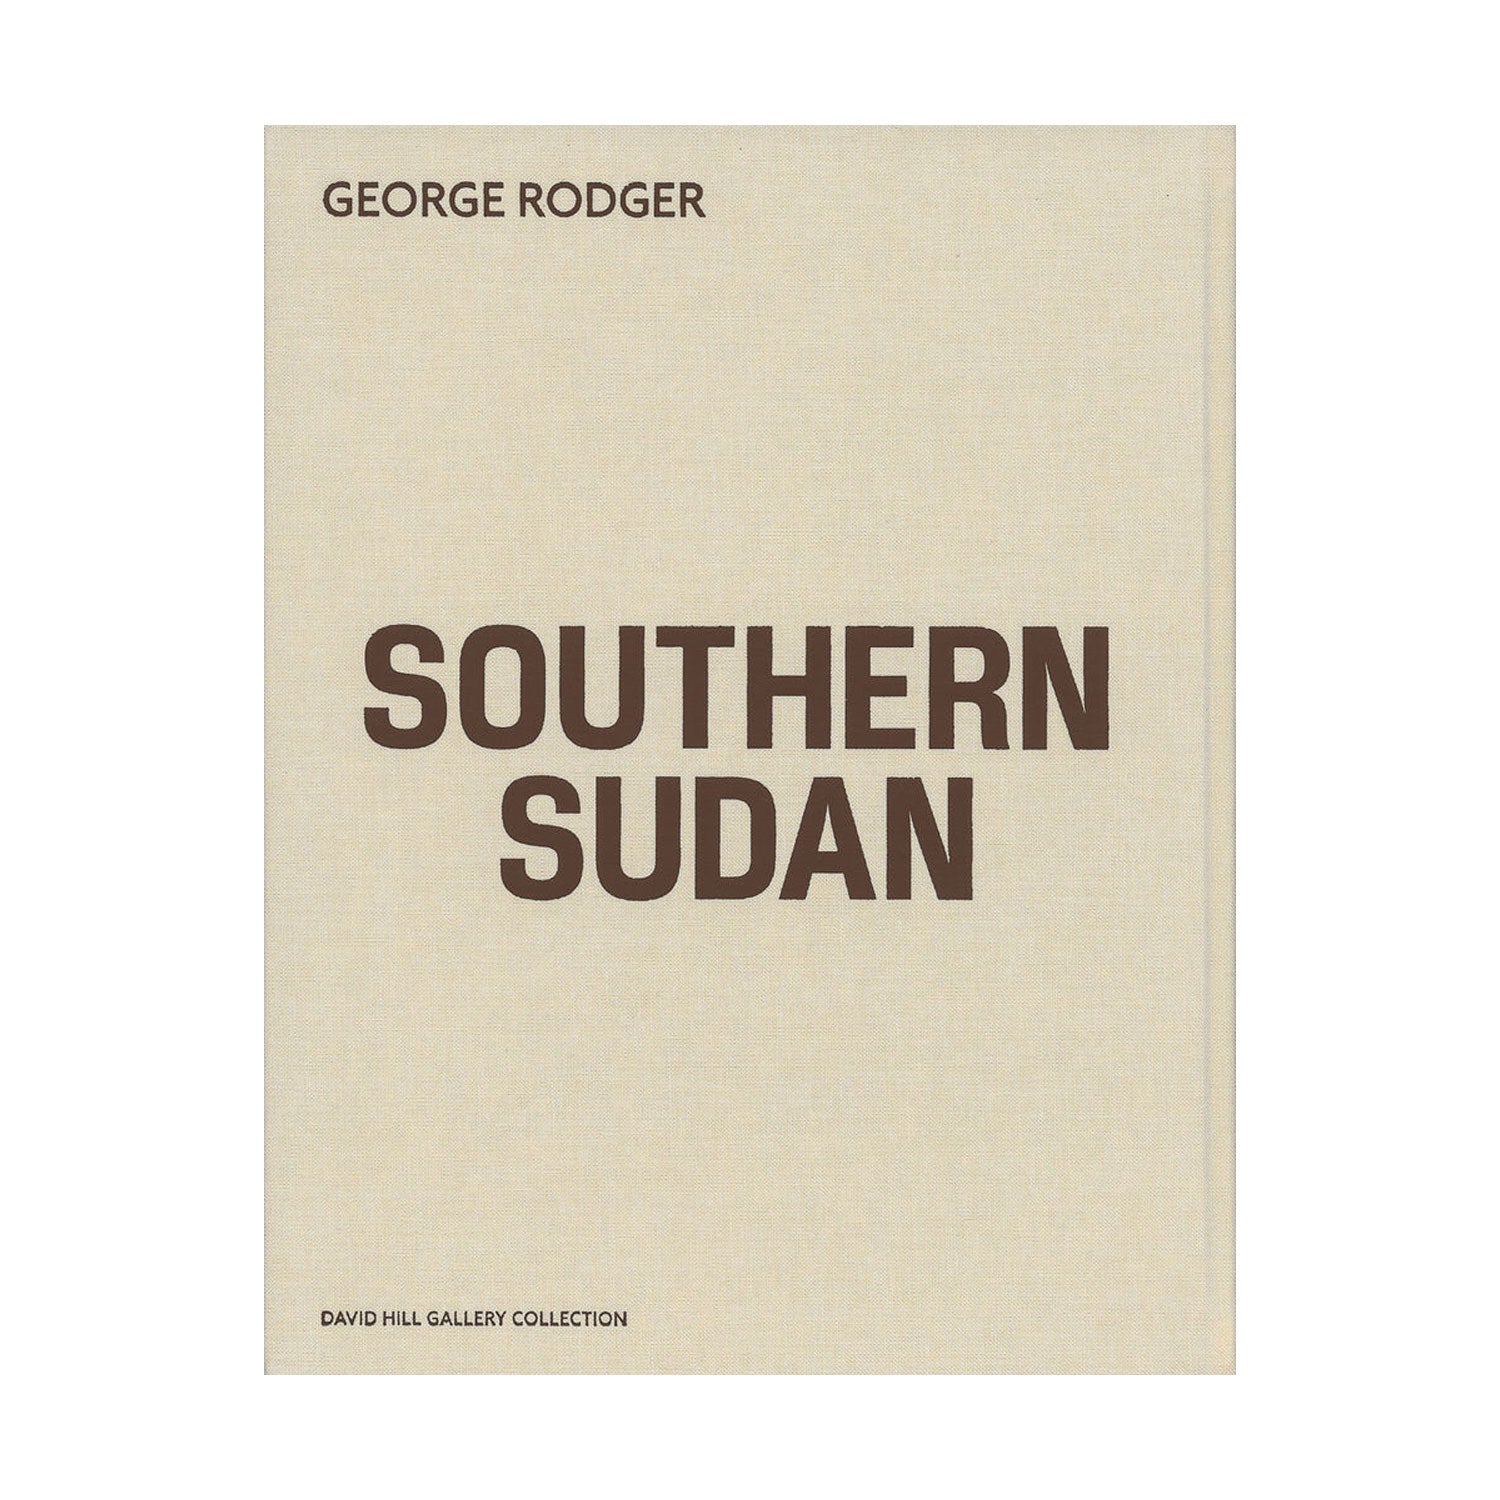 Southern Sudan by George Rodger Photo Museum Ireland